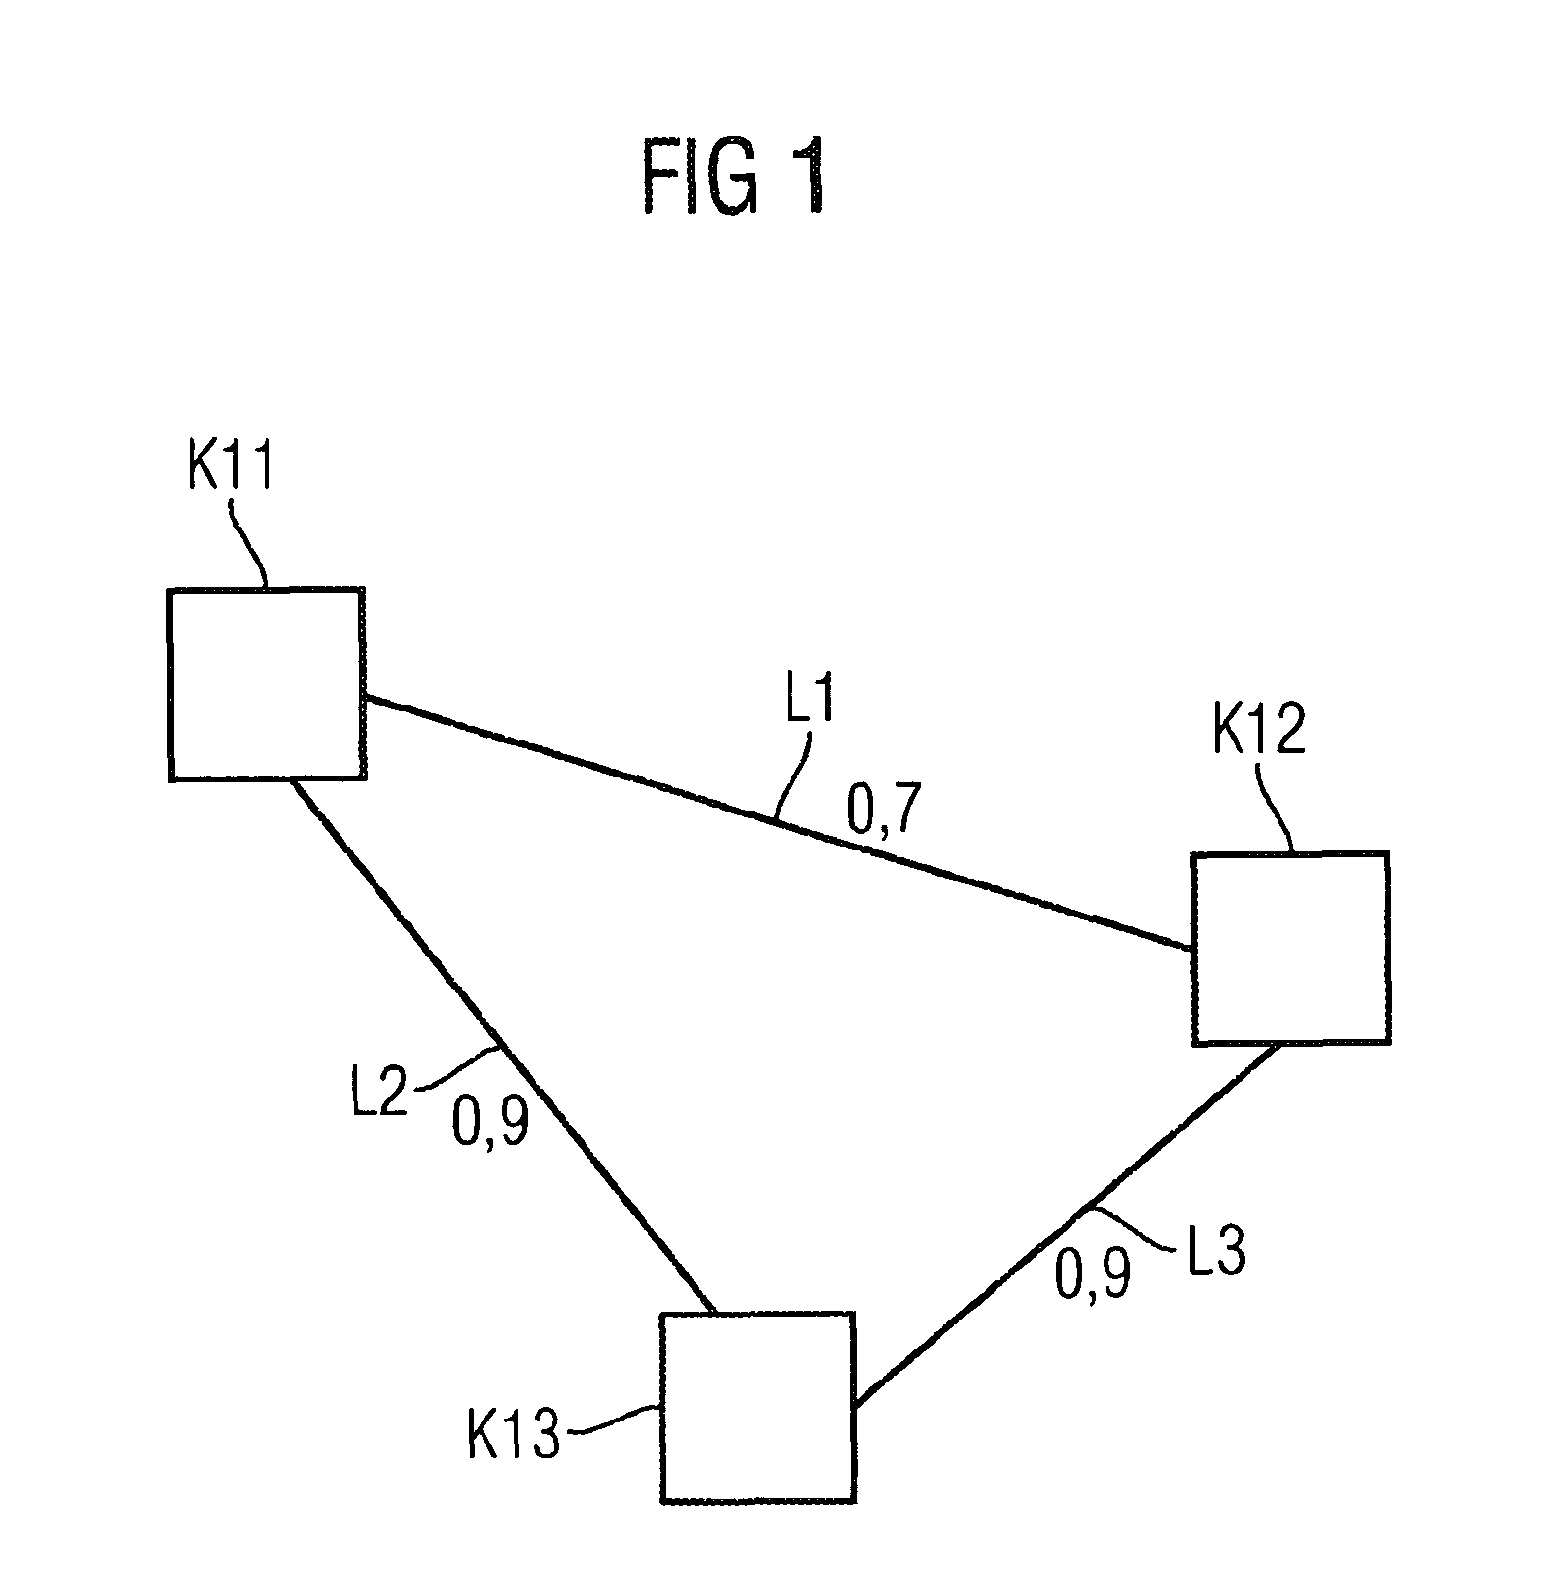 Method for determining a route distance value